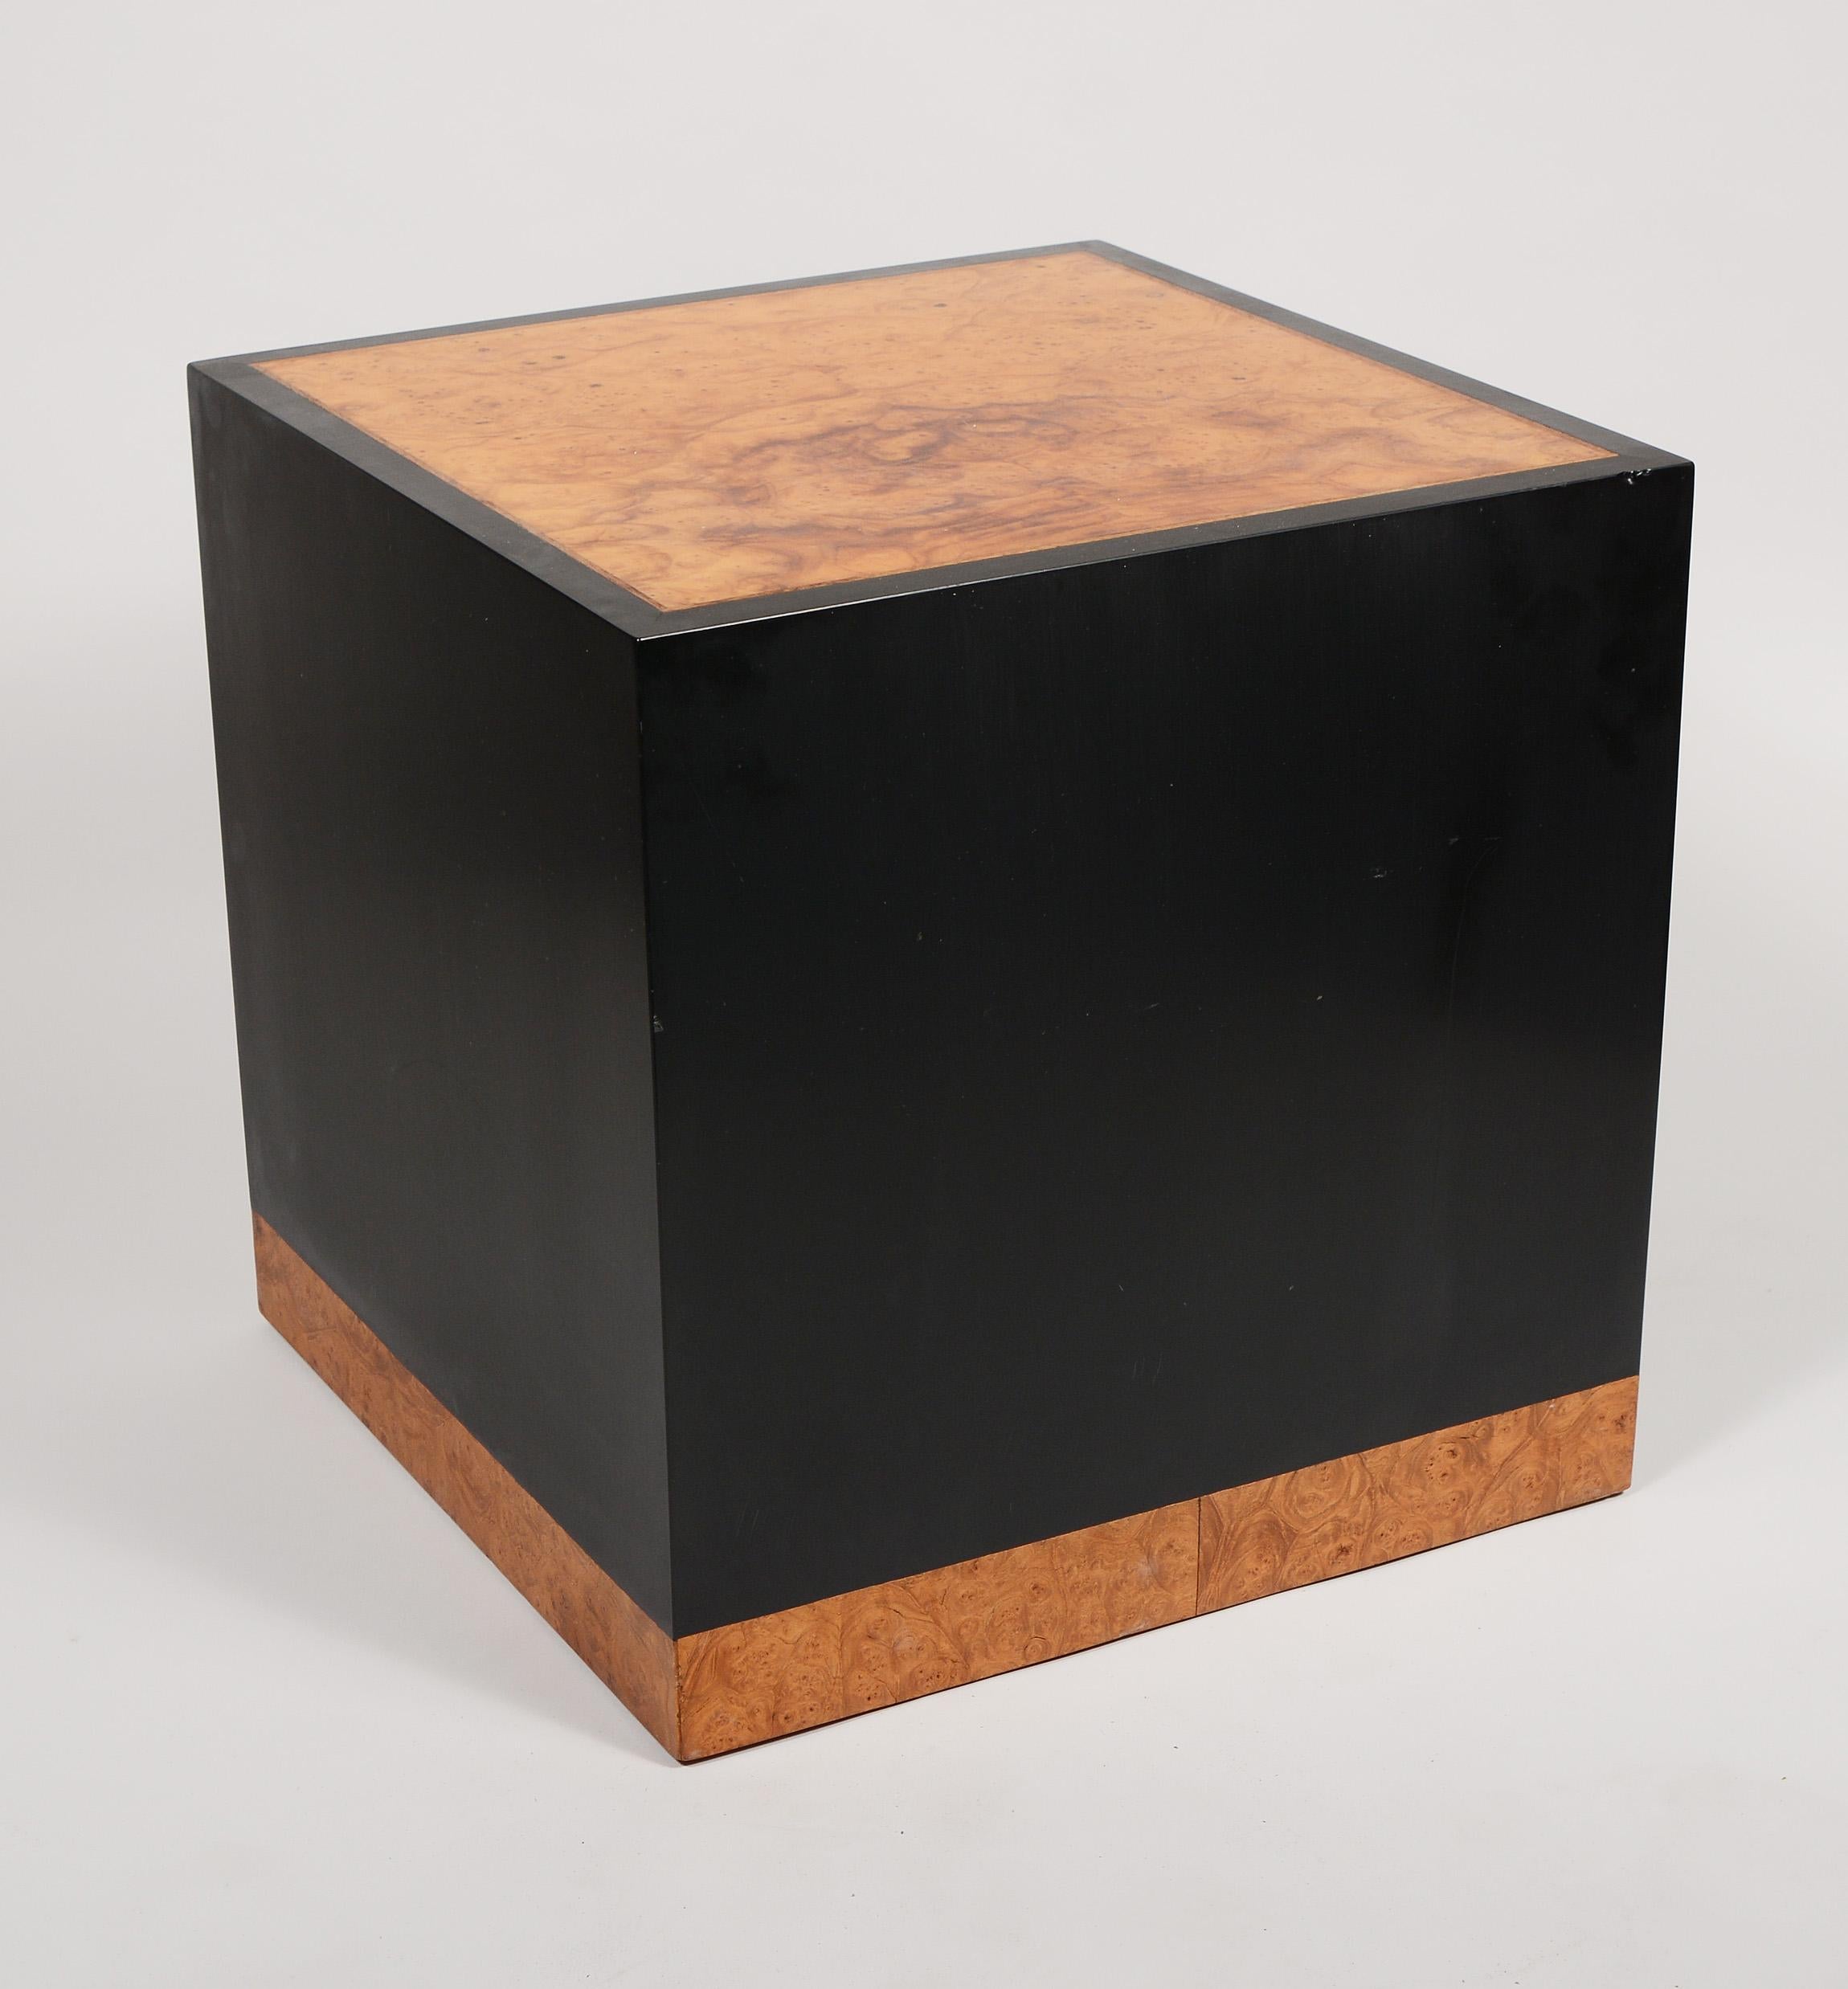 American Pair of Birdseye Maple Burl and Resin Cube Side Tables by Edward Wormley For Sale